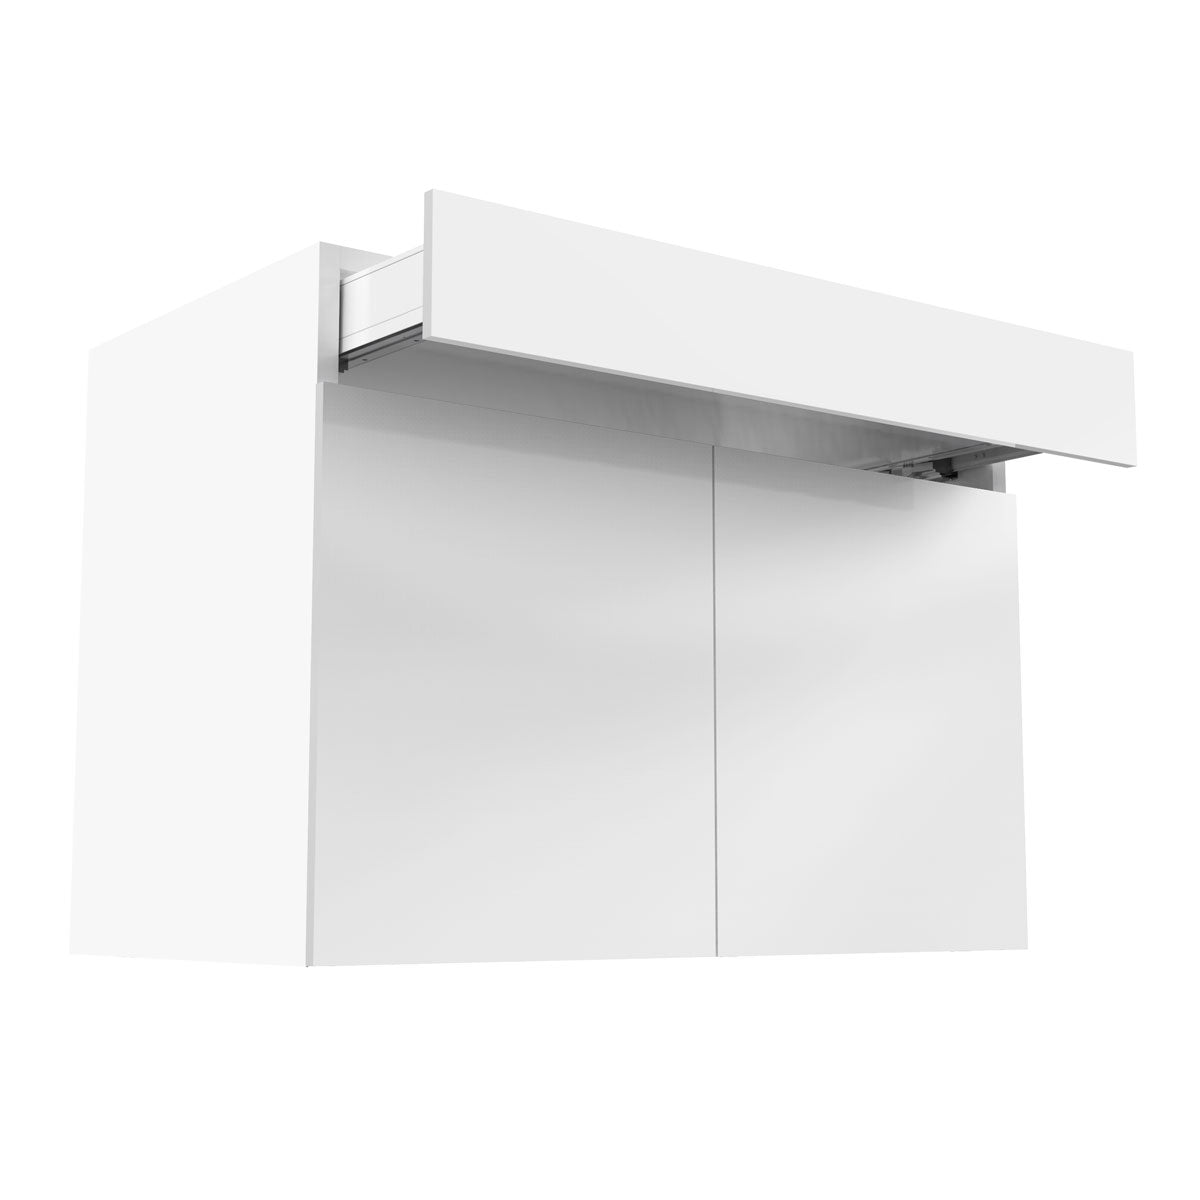 RTA - Glossy White - Double Door Base Cabinets | 42"W x 30"H x 23.8"D